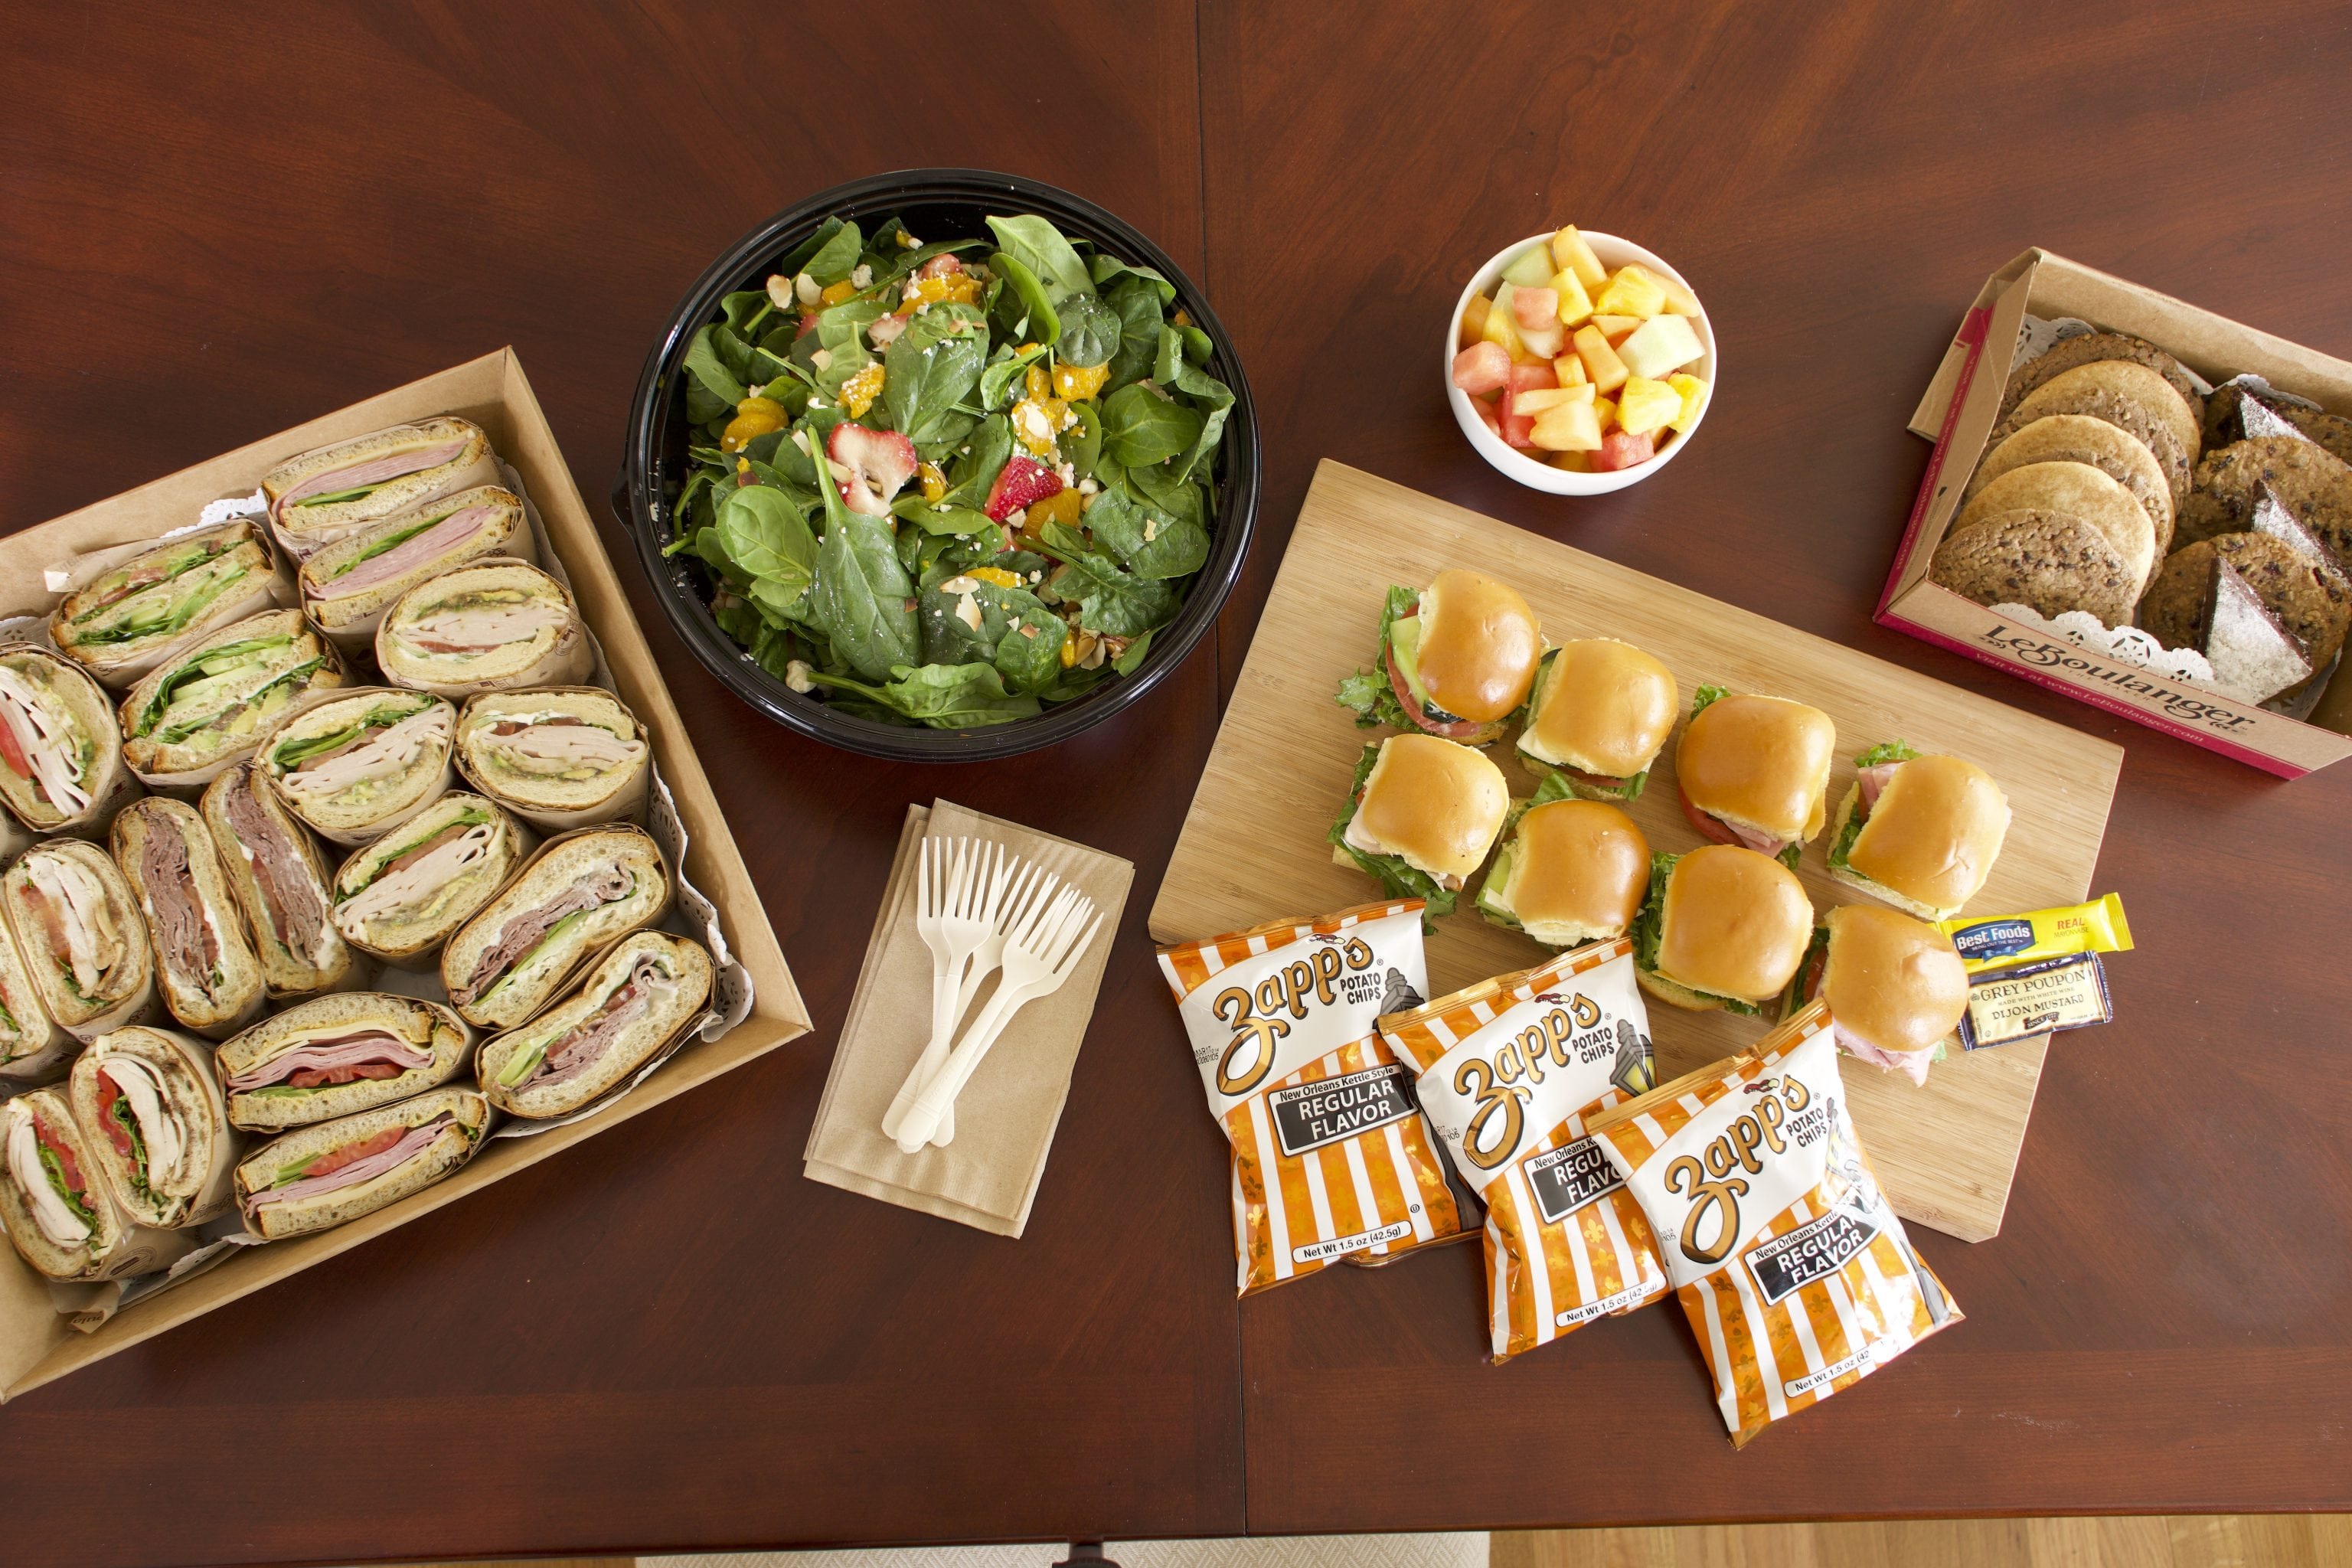 Sandwich catering in San Francisco is some of the best in the country.